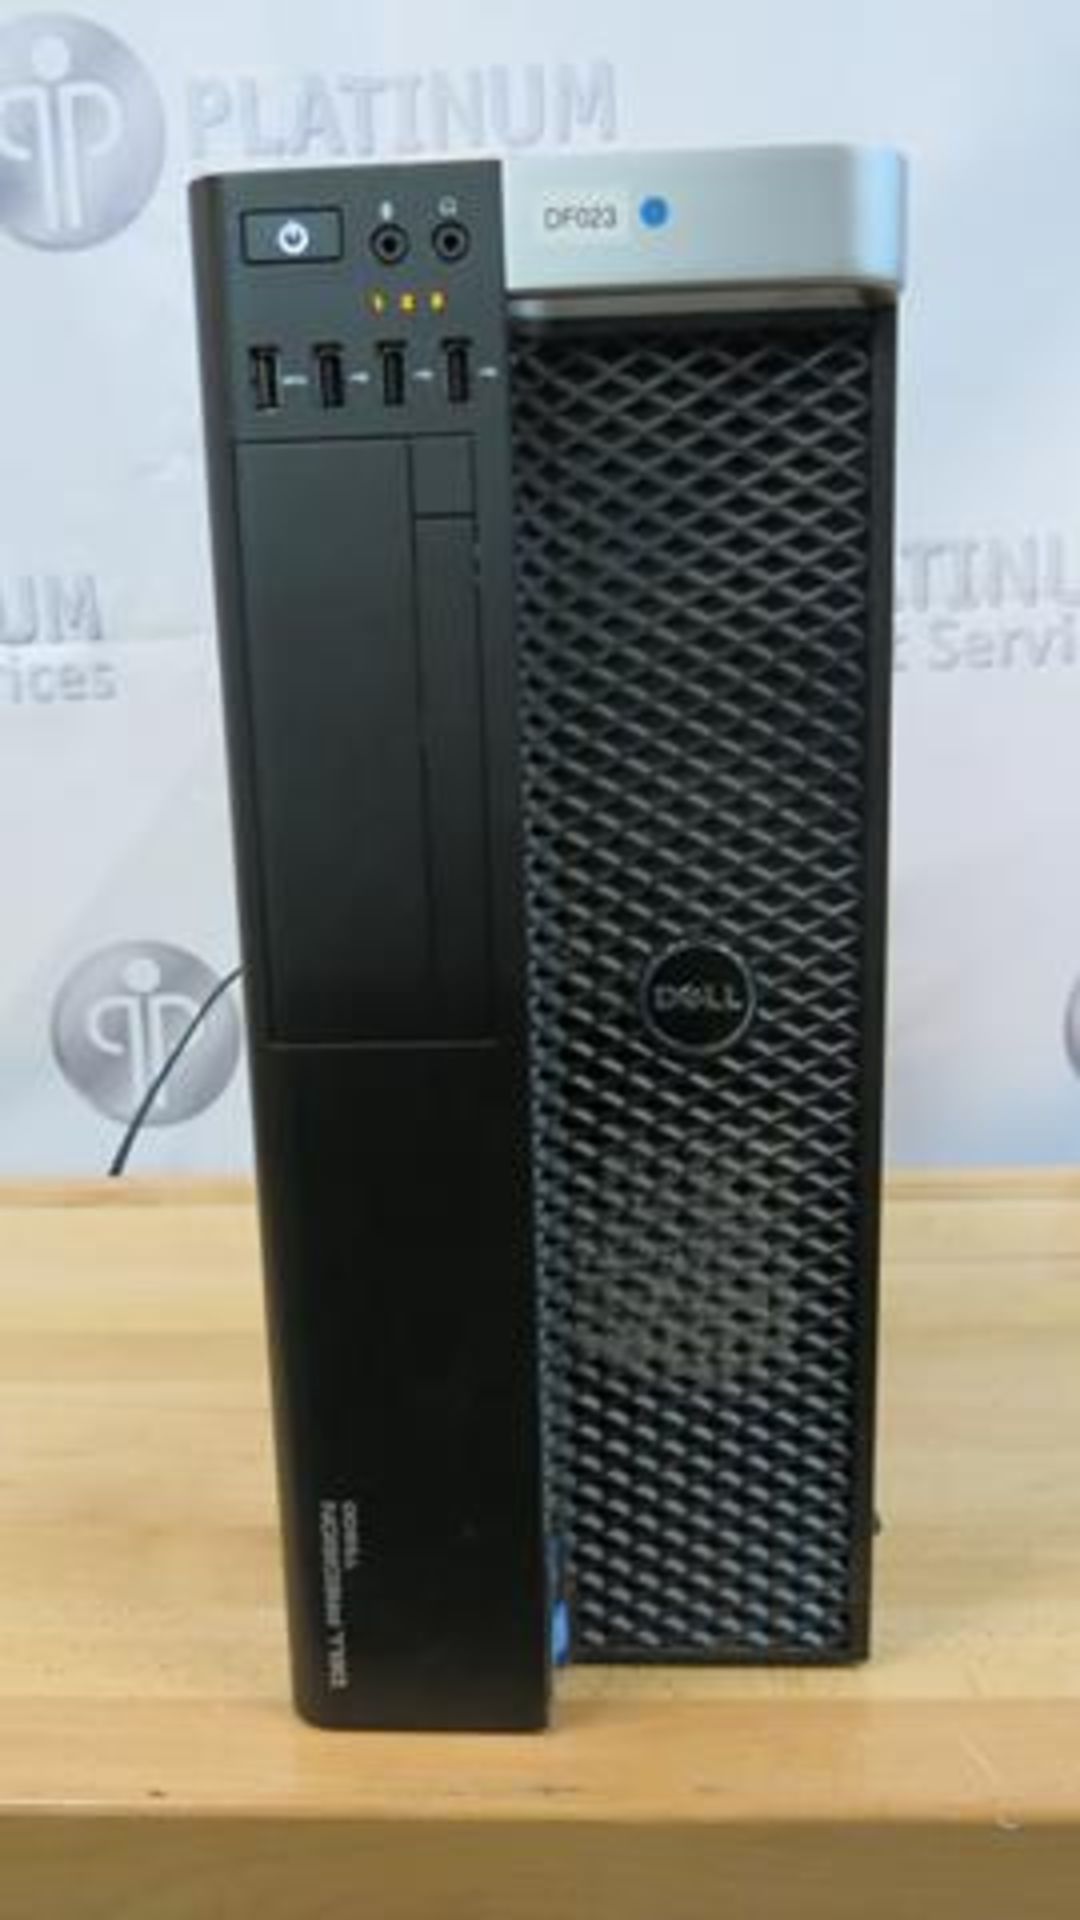 DELL, PRECISION T5600, DESKTOP WORKSTATION (UNIT IS NOT FUNCTIONING) (TAG#86)